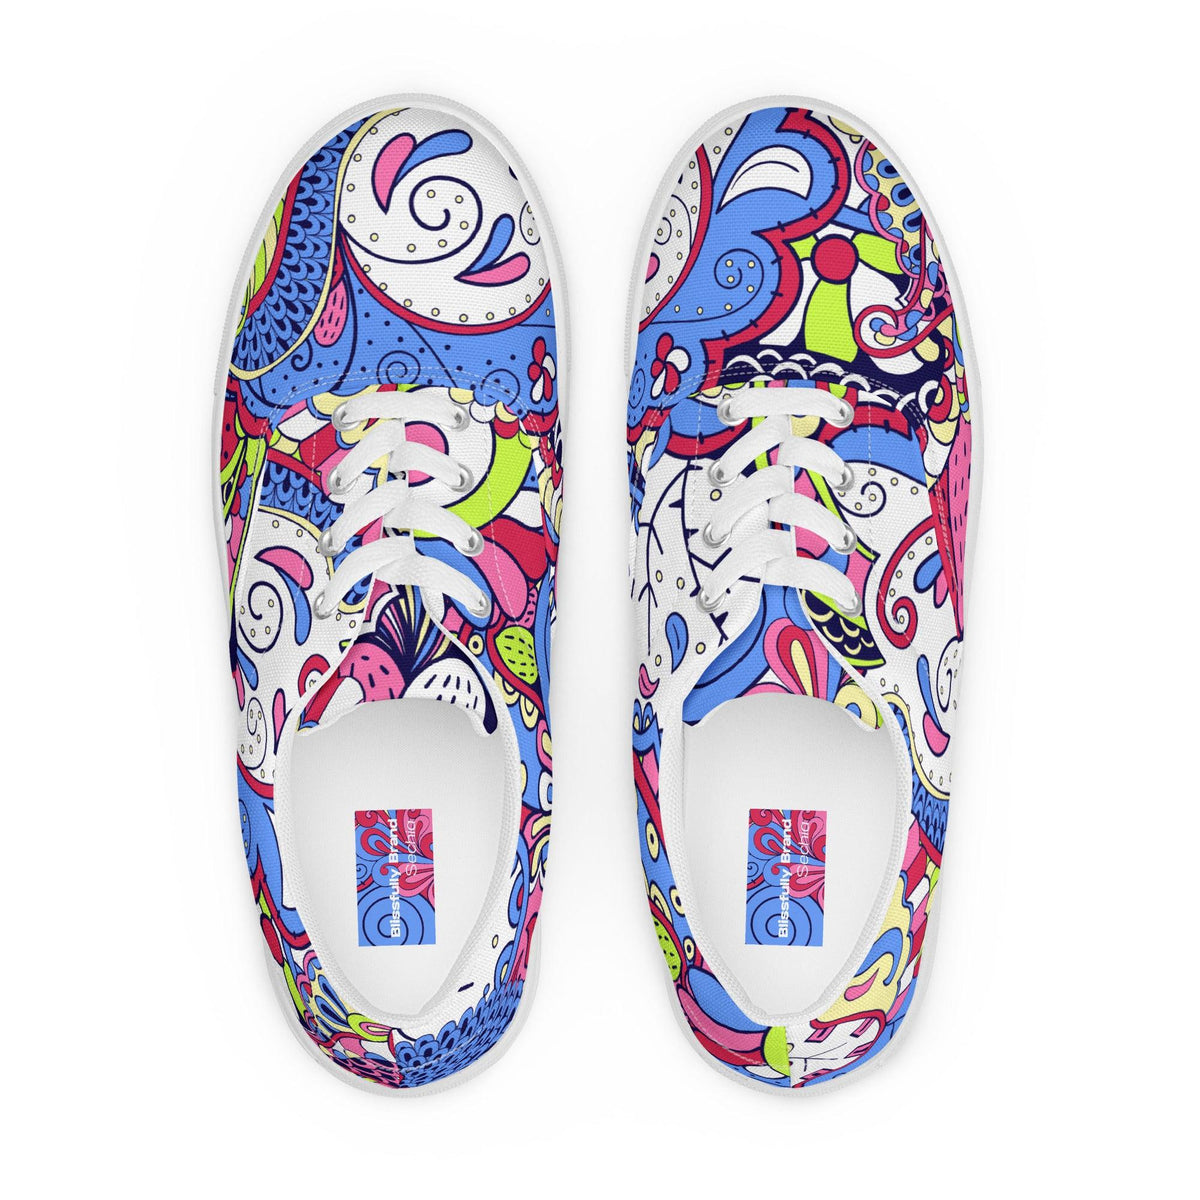 Sechia Lace-up Canvas Shoes - All Over Print - Kaleidoscope Abstract Floral - Pink Blue - Psychedelic Retro